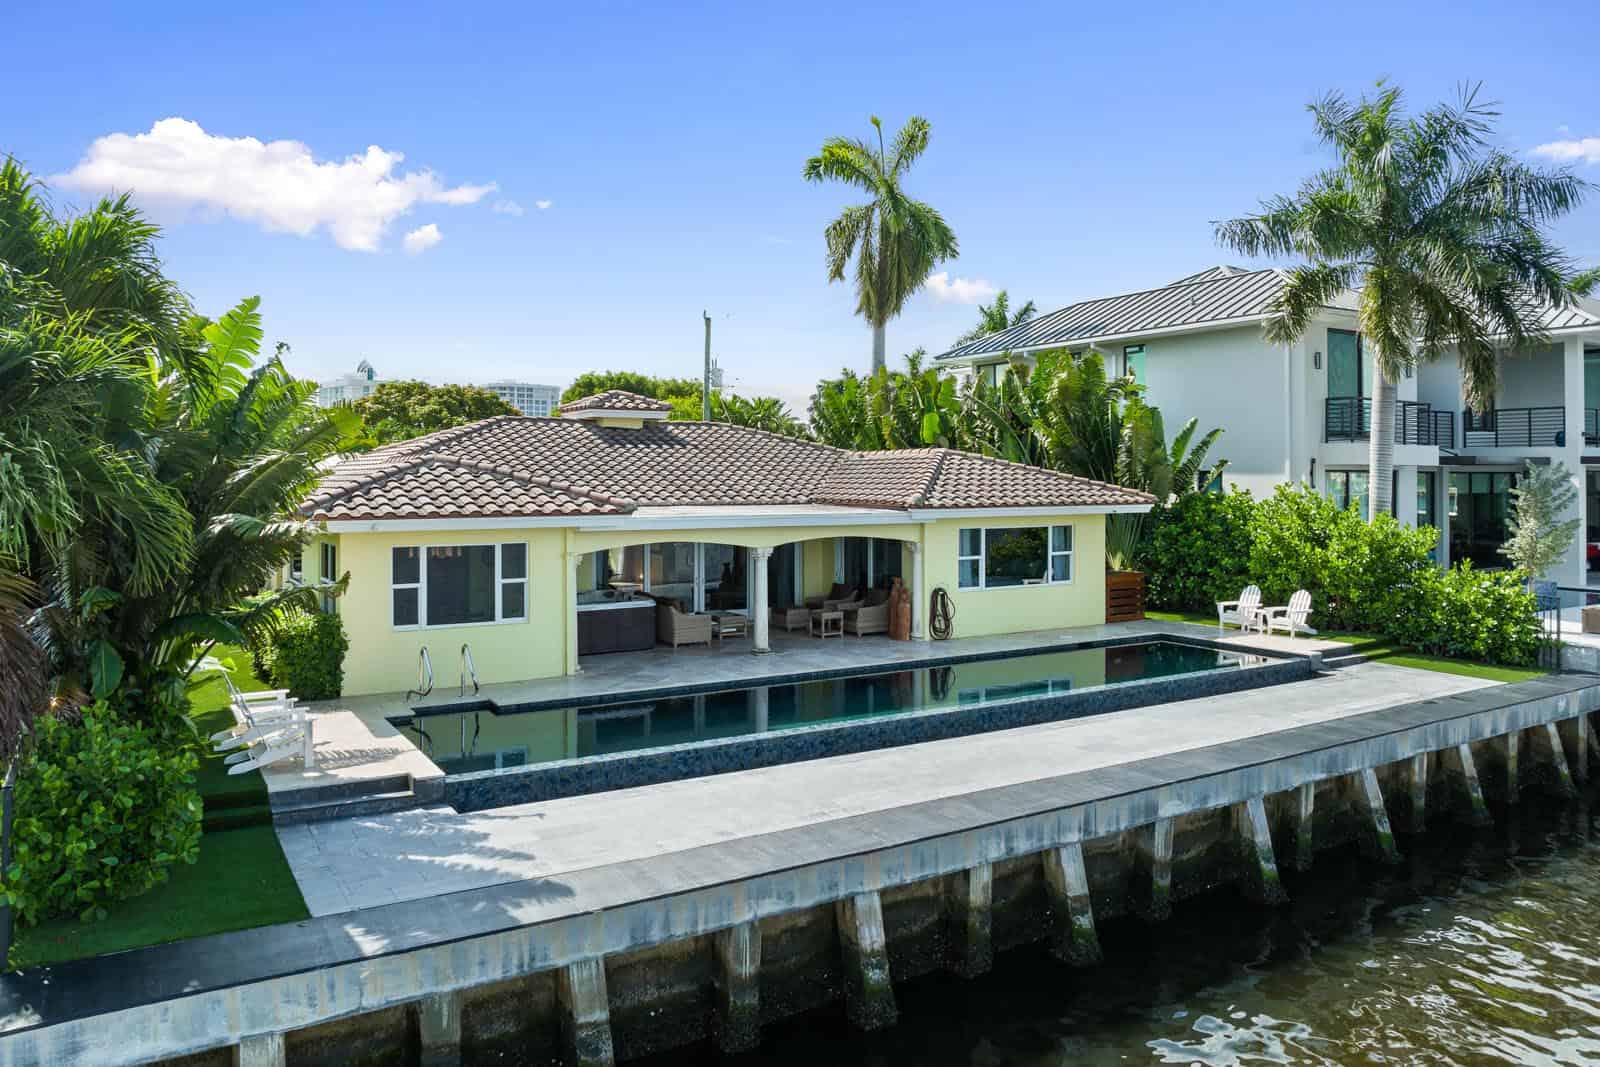 Pompano Beach Waterfront home for sale